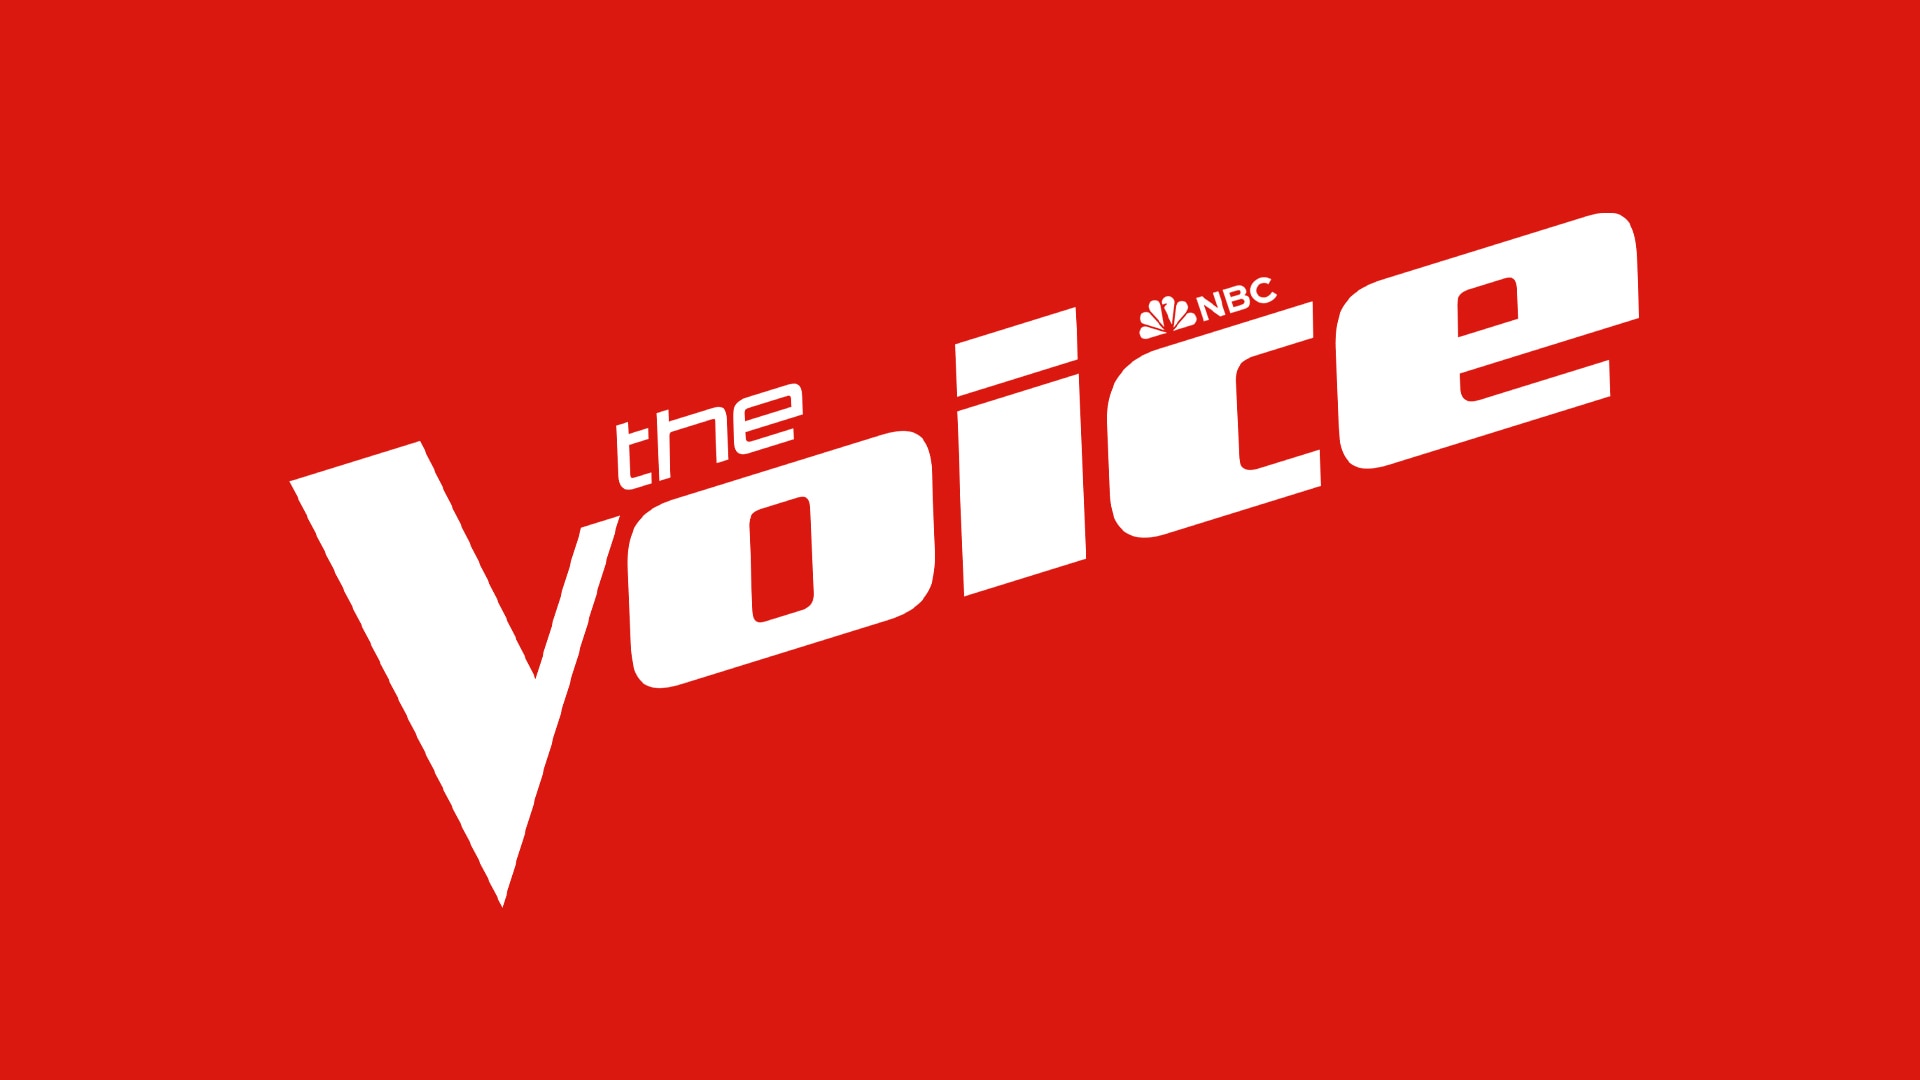 Top 7 the voice is an american reality television singing competition